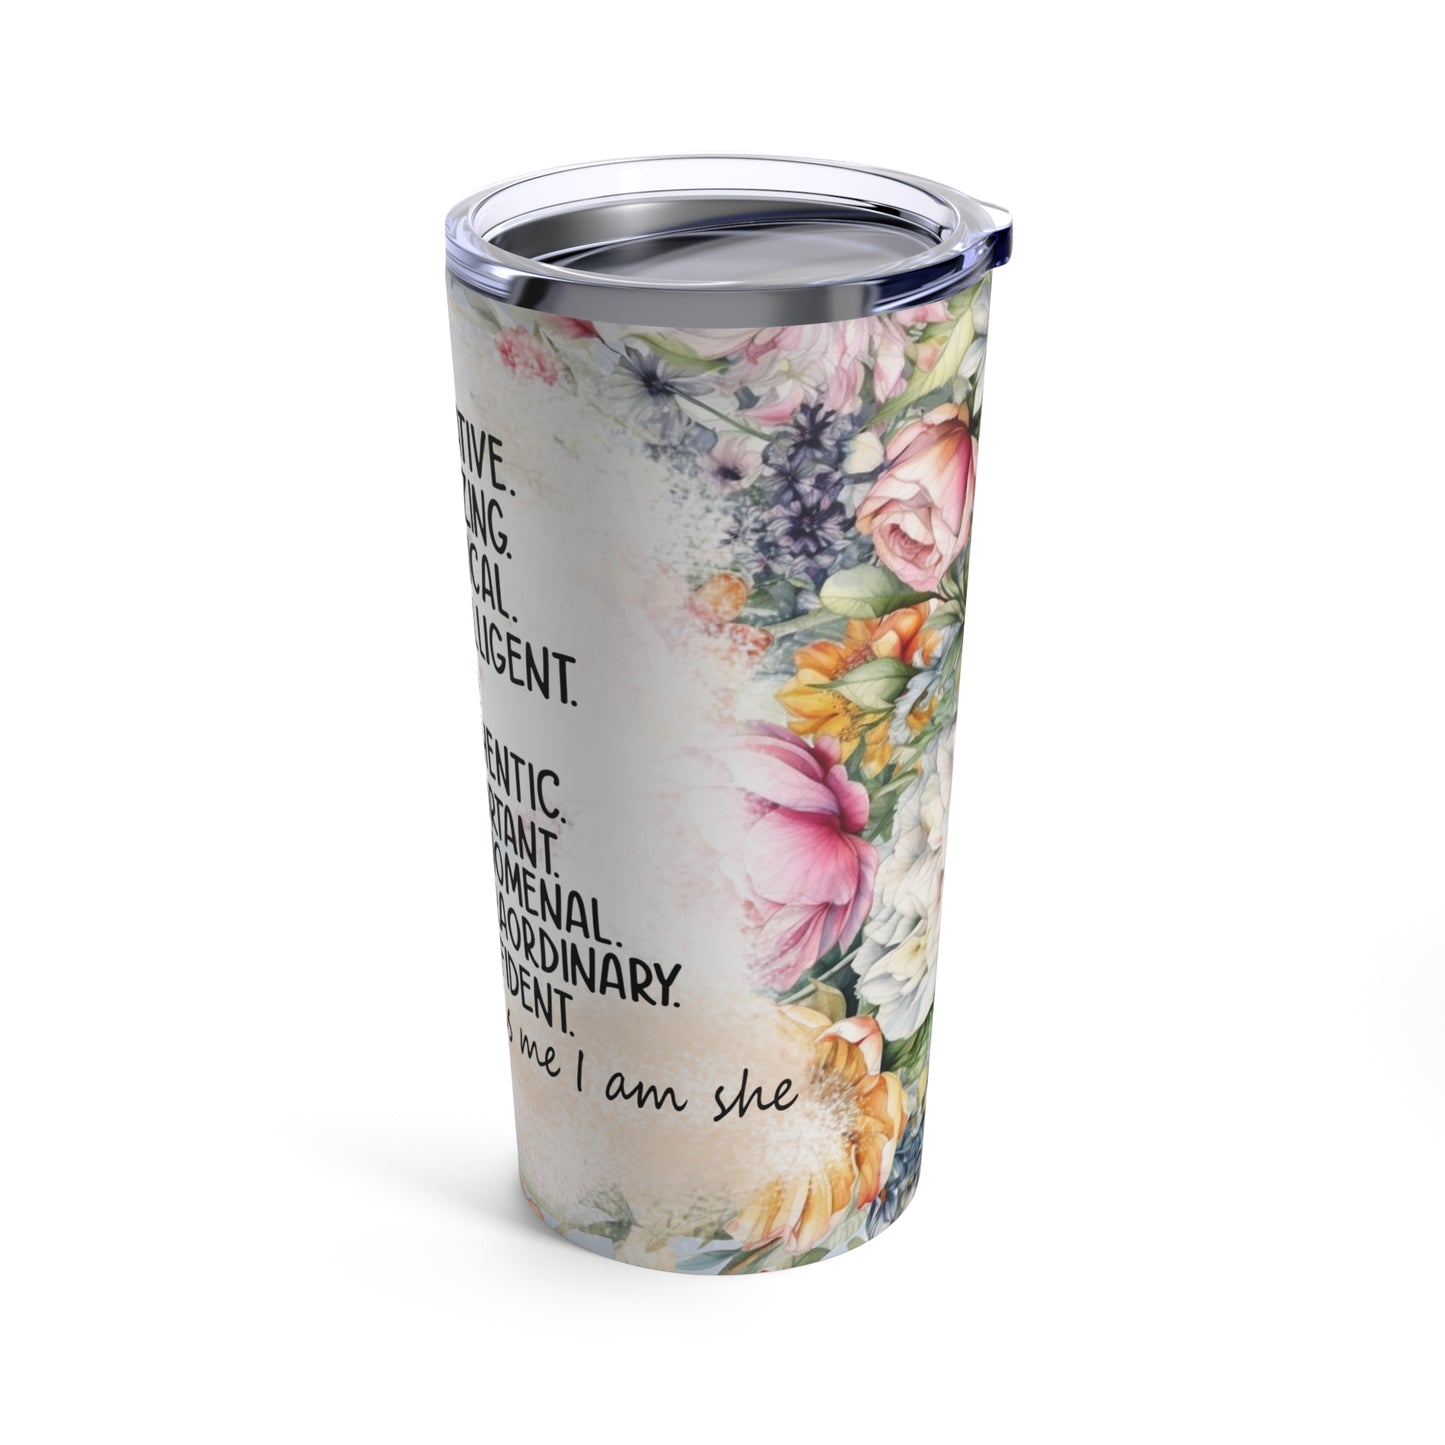 She is design #3, Mother's Day Gift, Wife, Sister, Significant Other, Girlfriend, Grandmother, Gift, Stainless Steel Tumbler 20oz